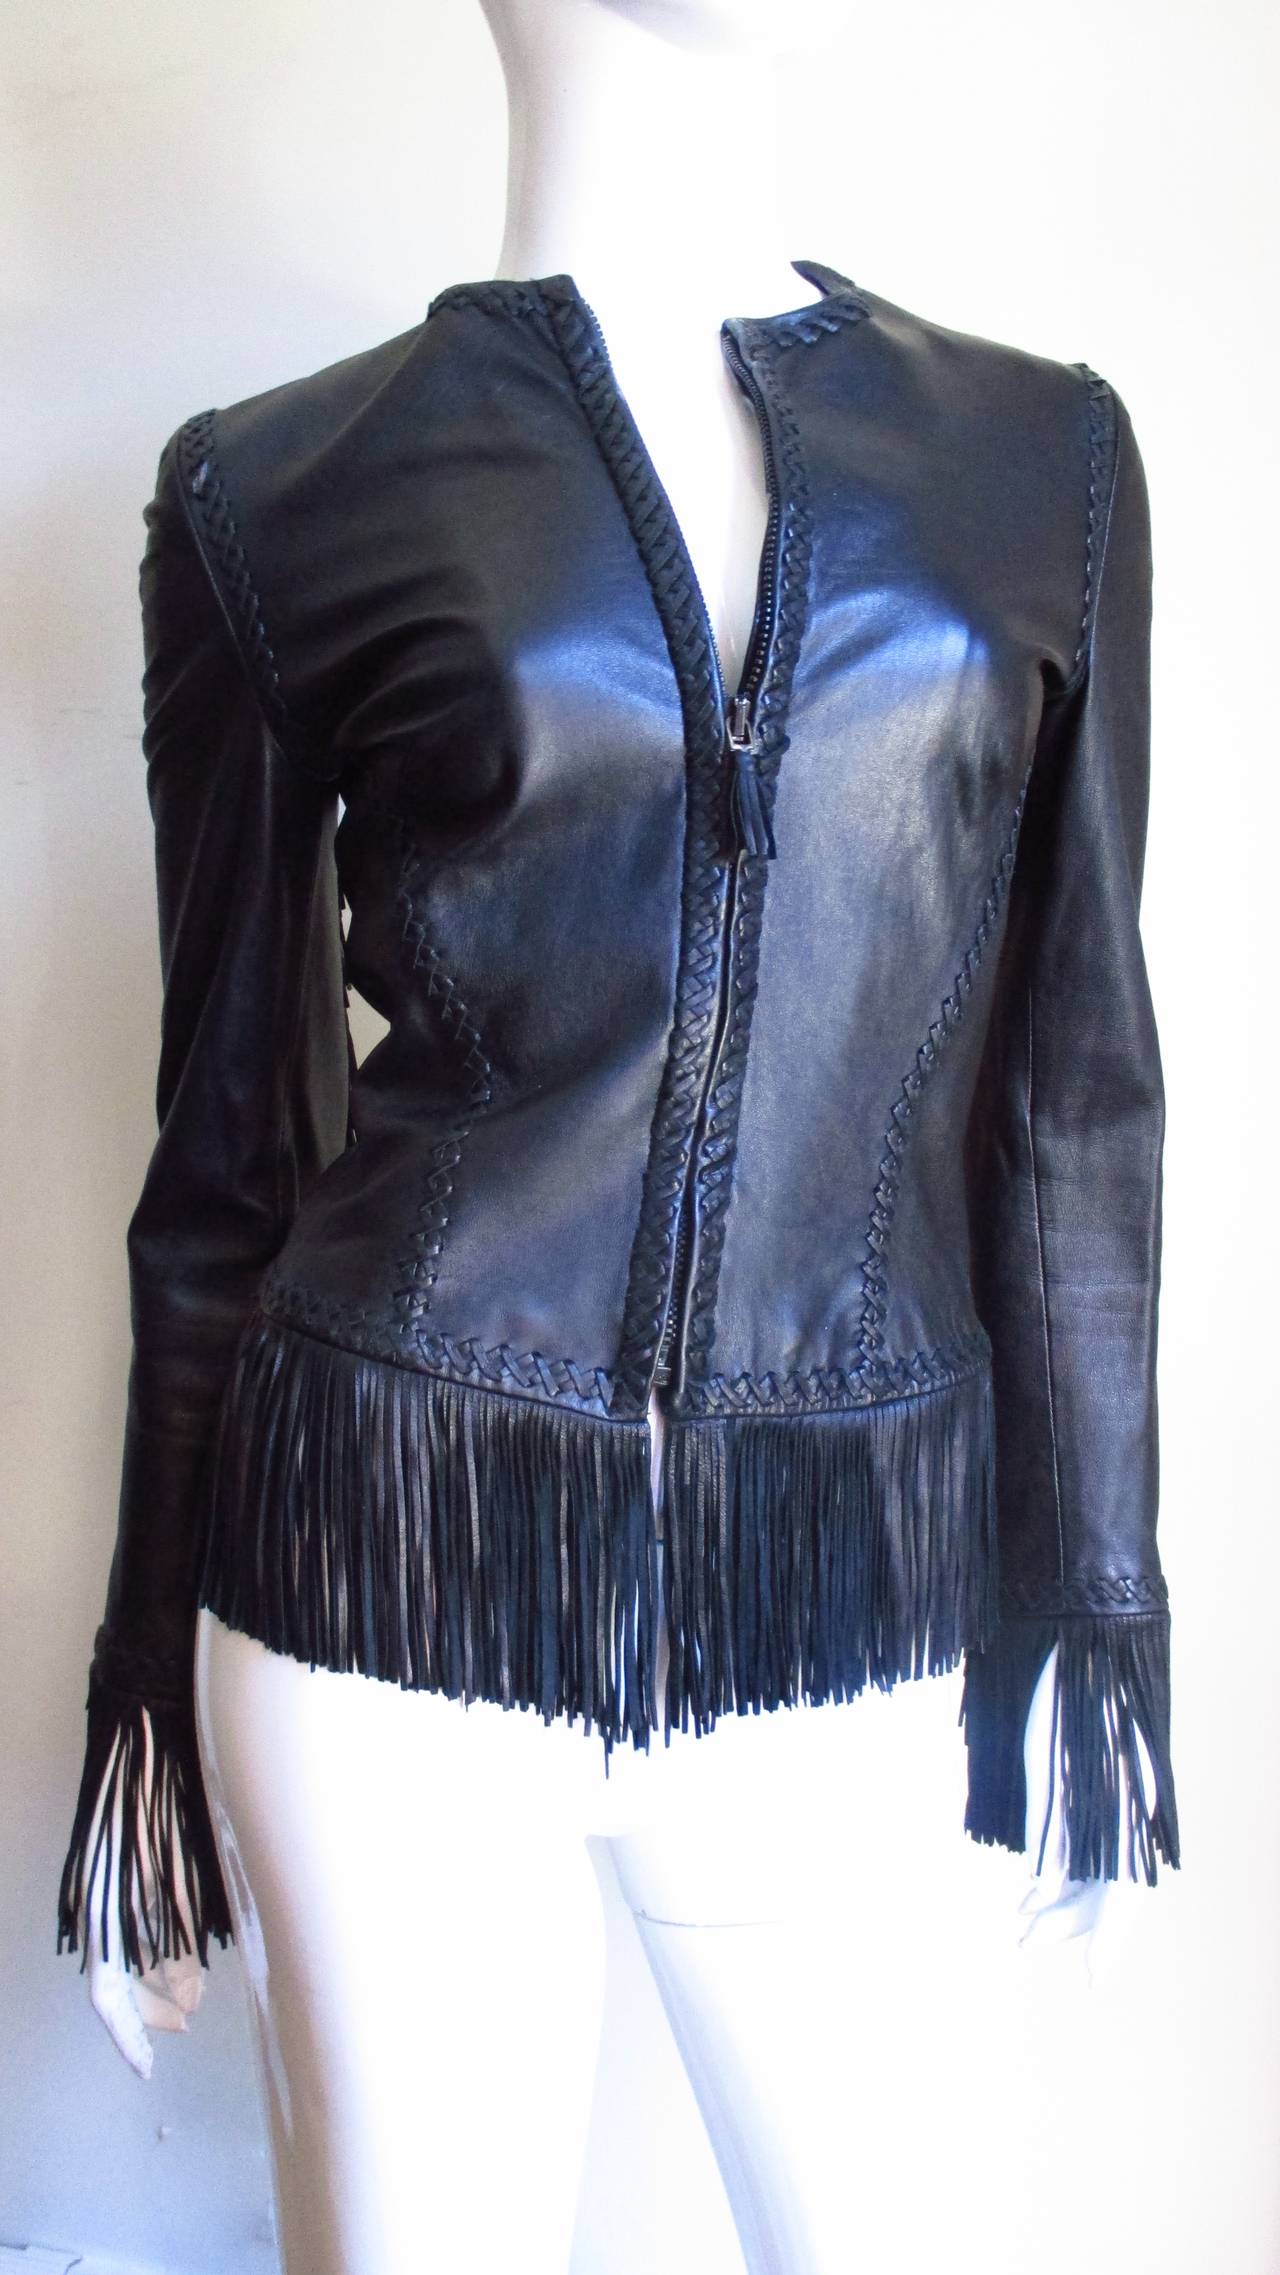 One of Gianni Versace's earlier masterpieces in this supple, soft black leather fringe jacket.  It is fitted with seaming which along with hems and edges are highlighted with intricate hand braiding plus 4